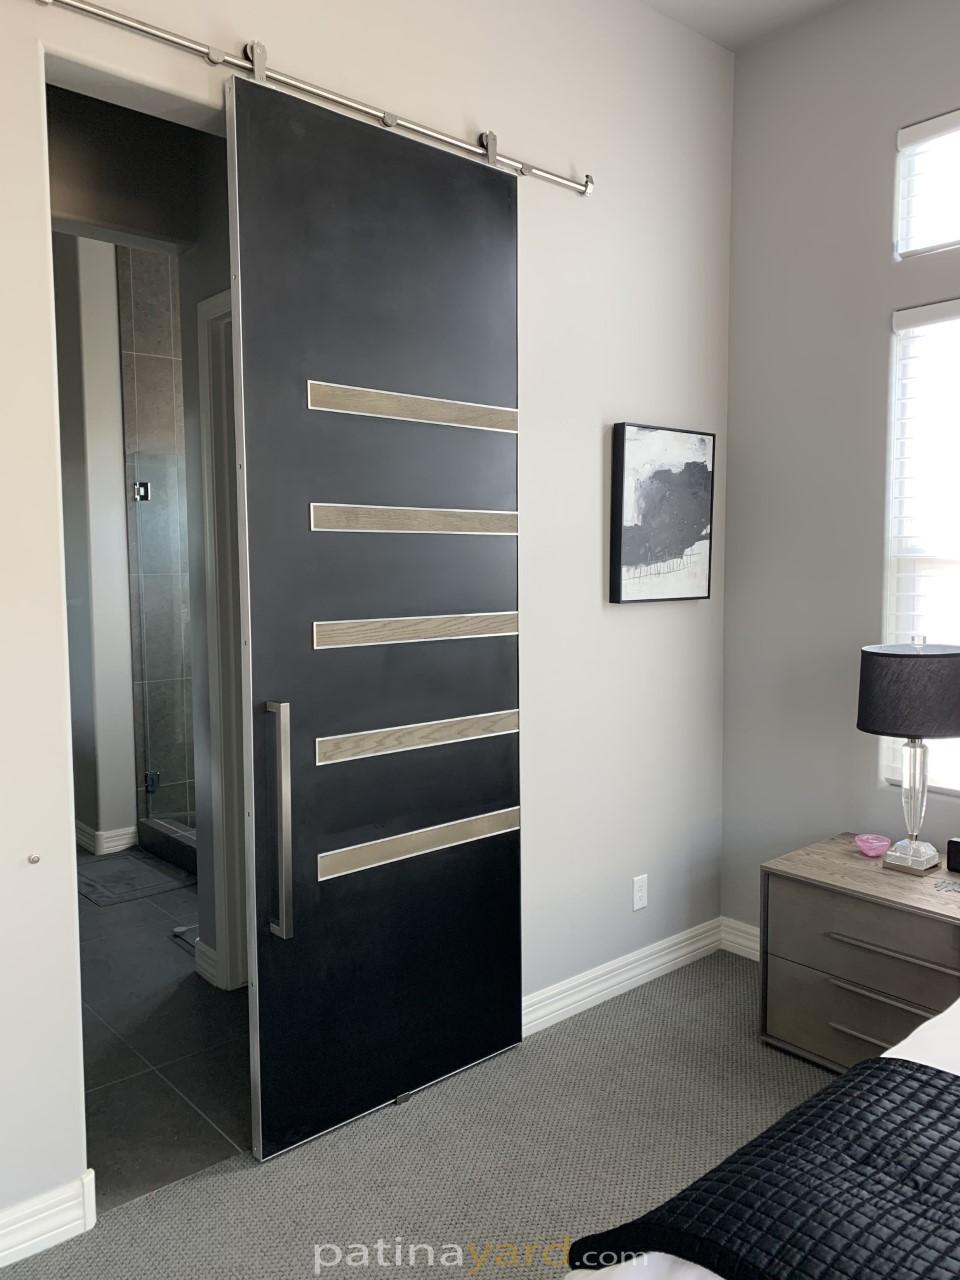 Contemporary metal panel door with wood pieces and metal edge frame